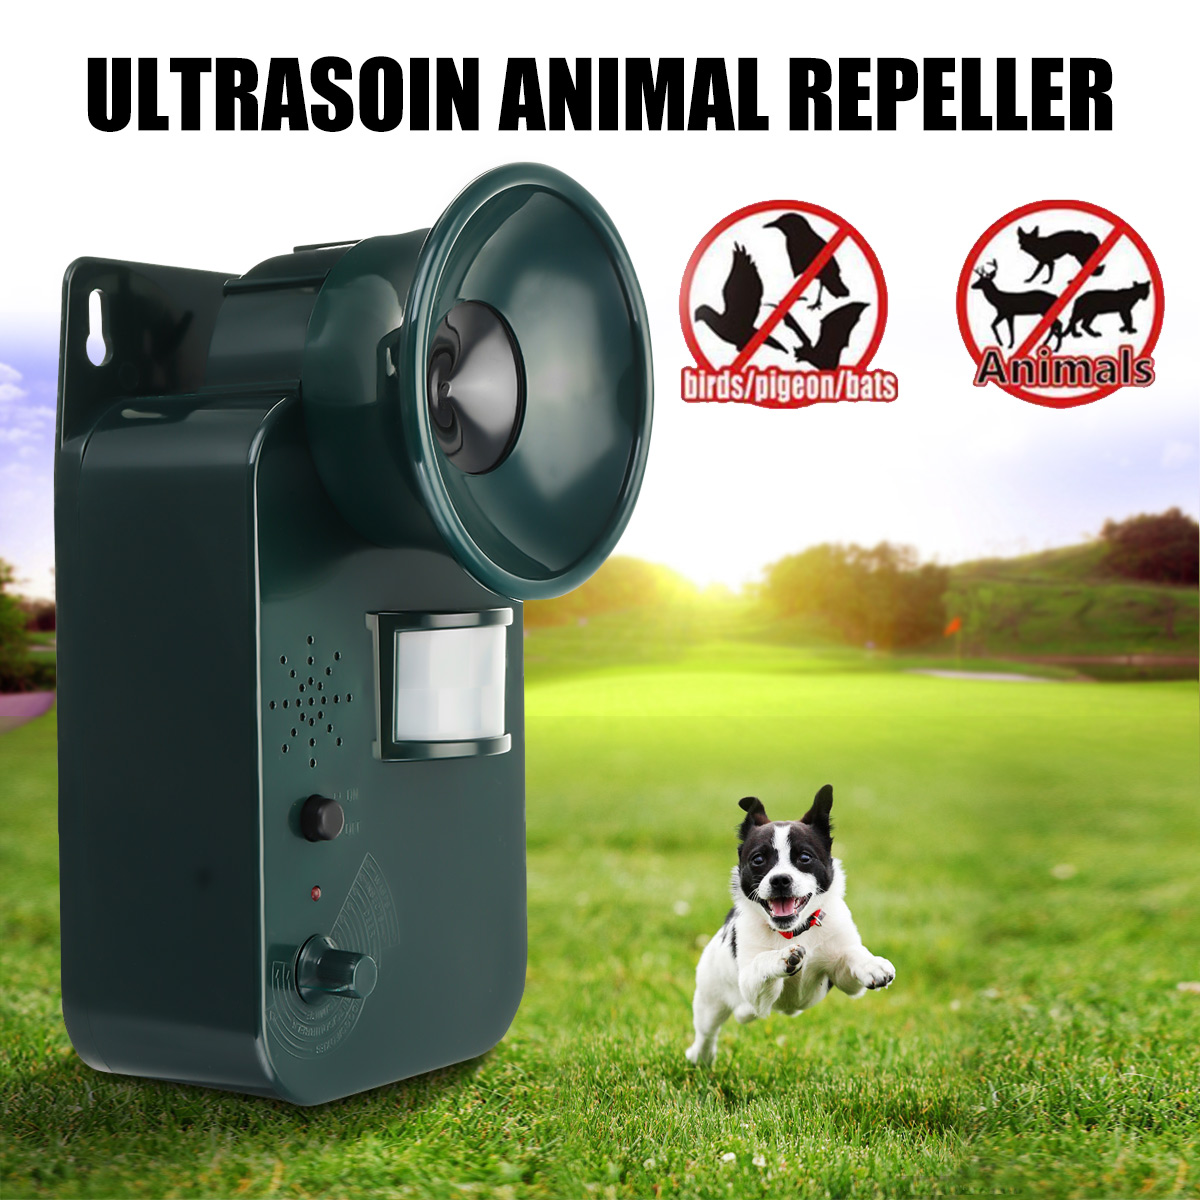 5000sqft-9V-DC-Ultra-sonic-Cordless-Pest-Animal-Repeller-Outdoor-Safely-Repel-Various-Animal-1304035-7